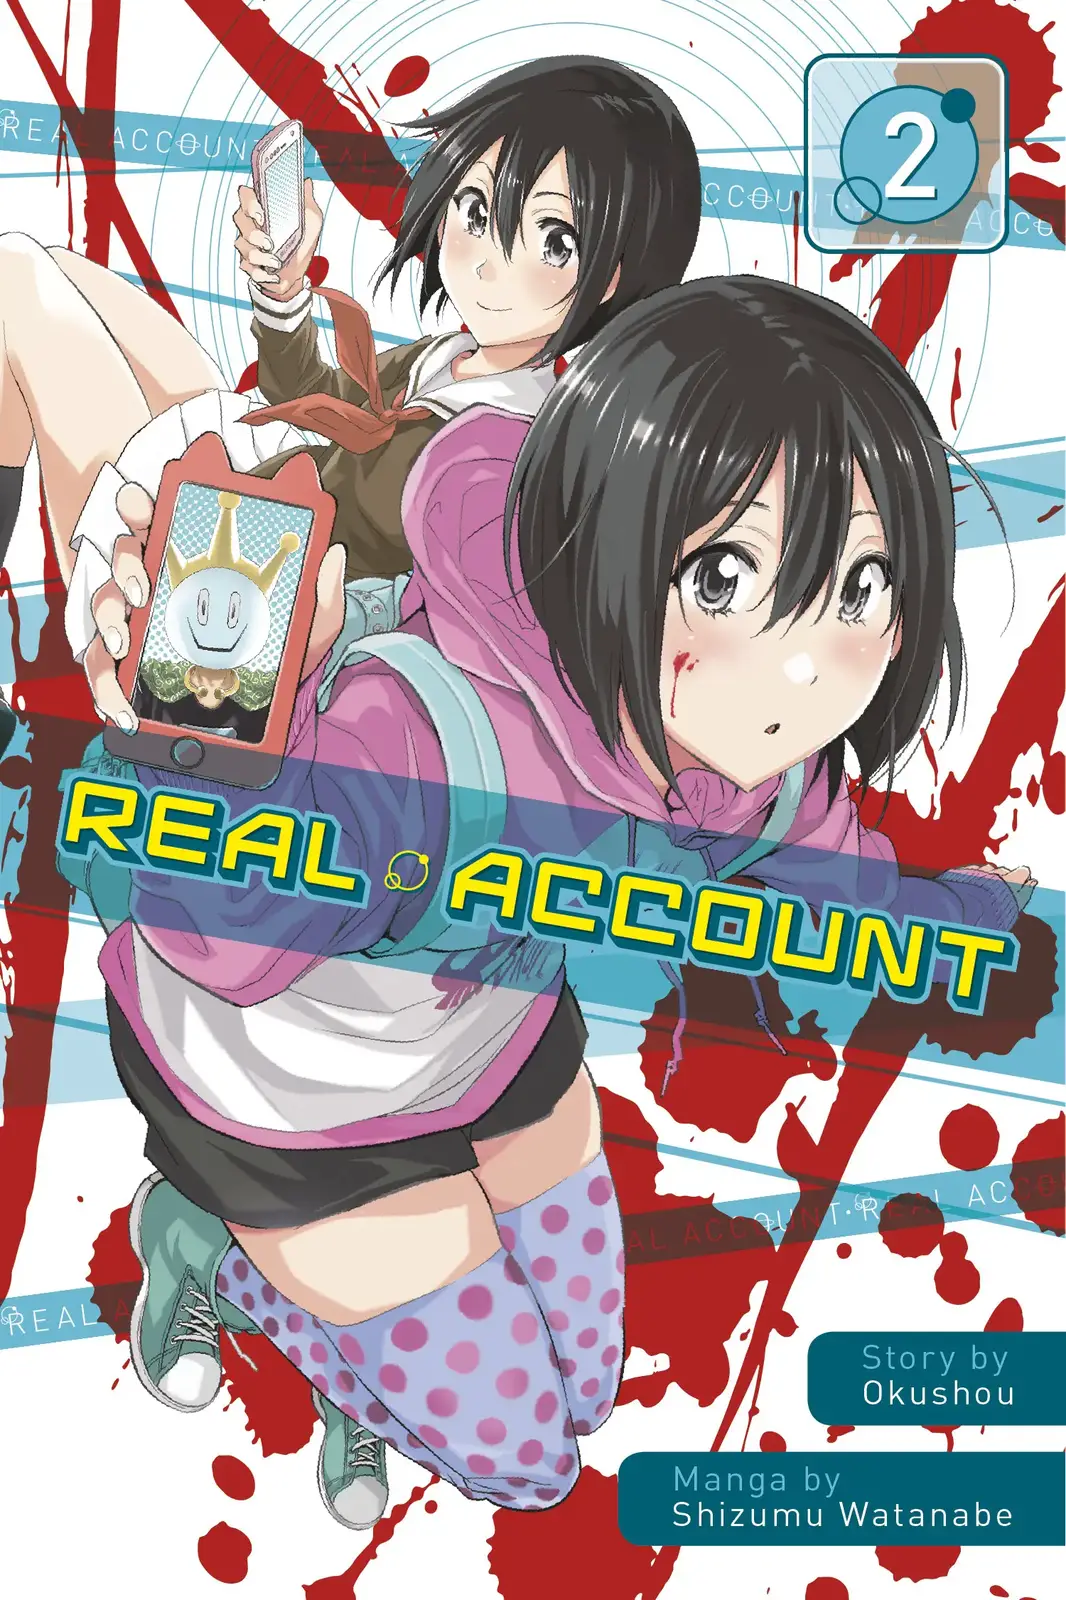 Real Account Vol 2 Review Aipt